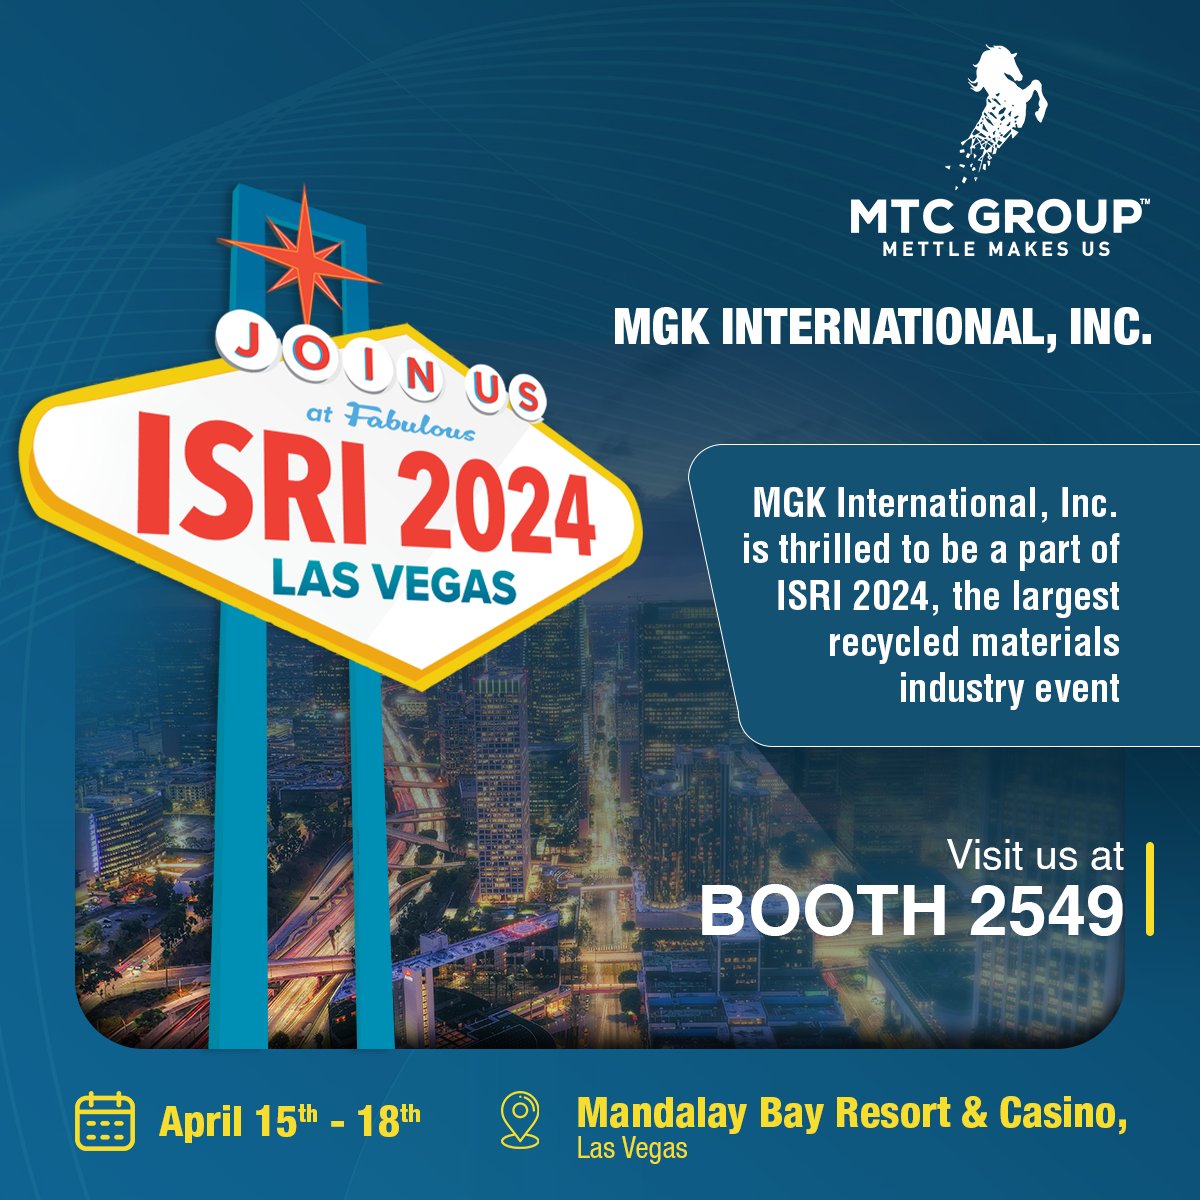 We're excited to announce our participation at #ISRI2024. Join us for a deep dive into sustainable solutions. We are ready to welcome you to our booth 2549 for insightful discussions and to discover how we can collaborate for growth and advancement. See you there! #MTCGroup